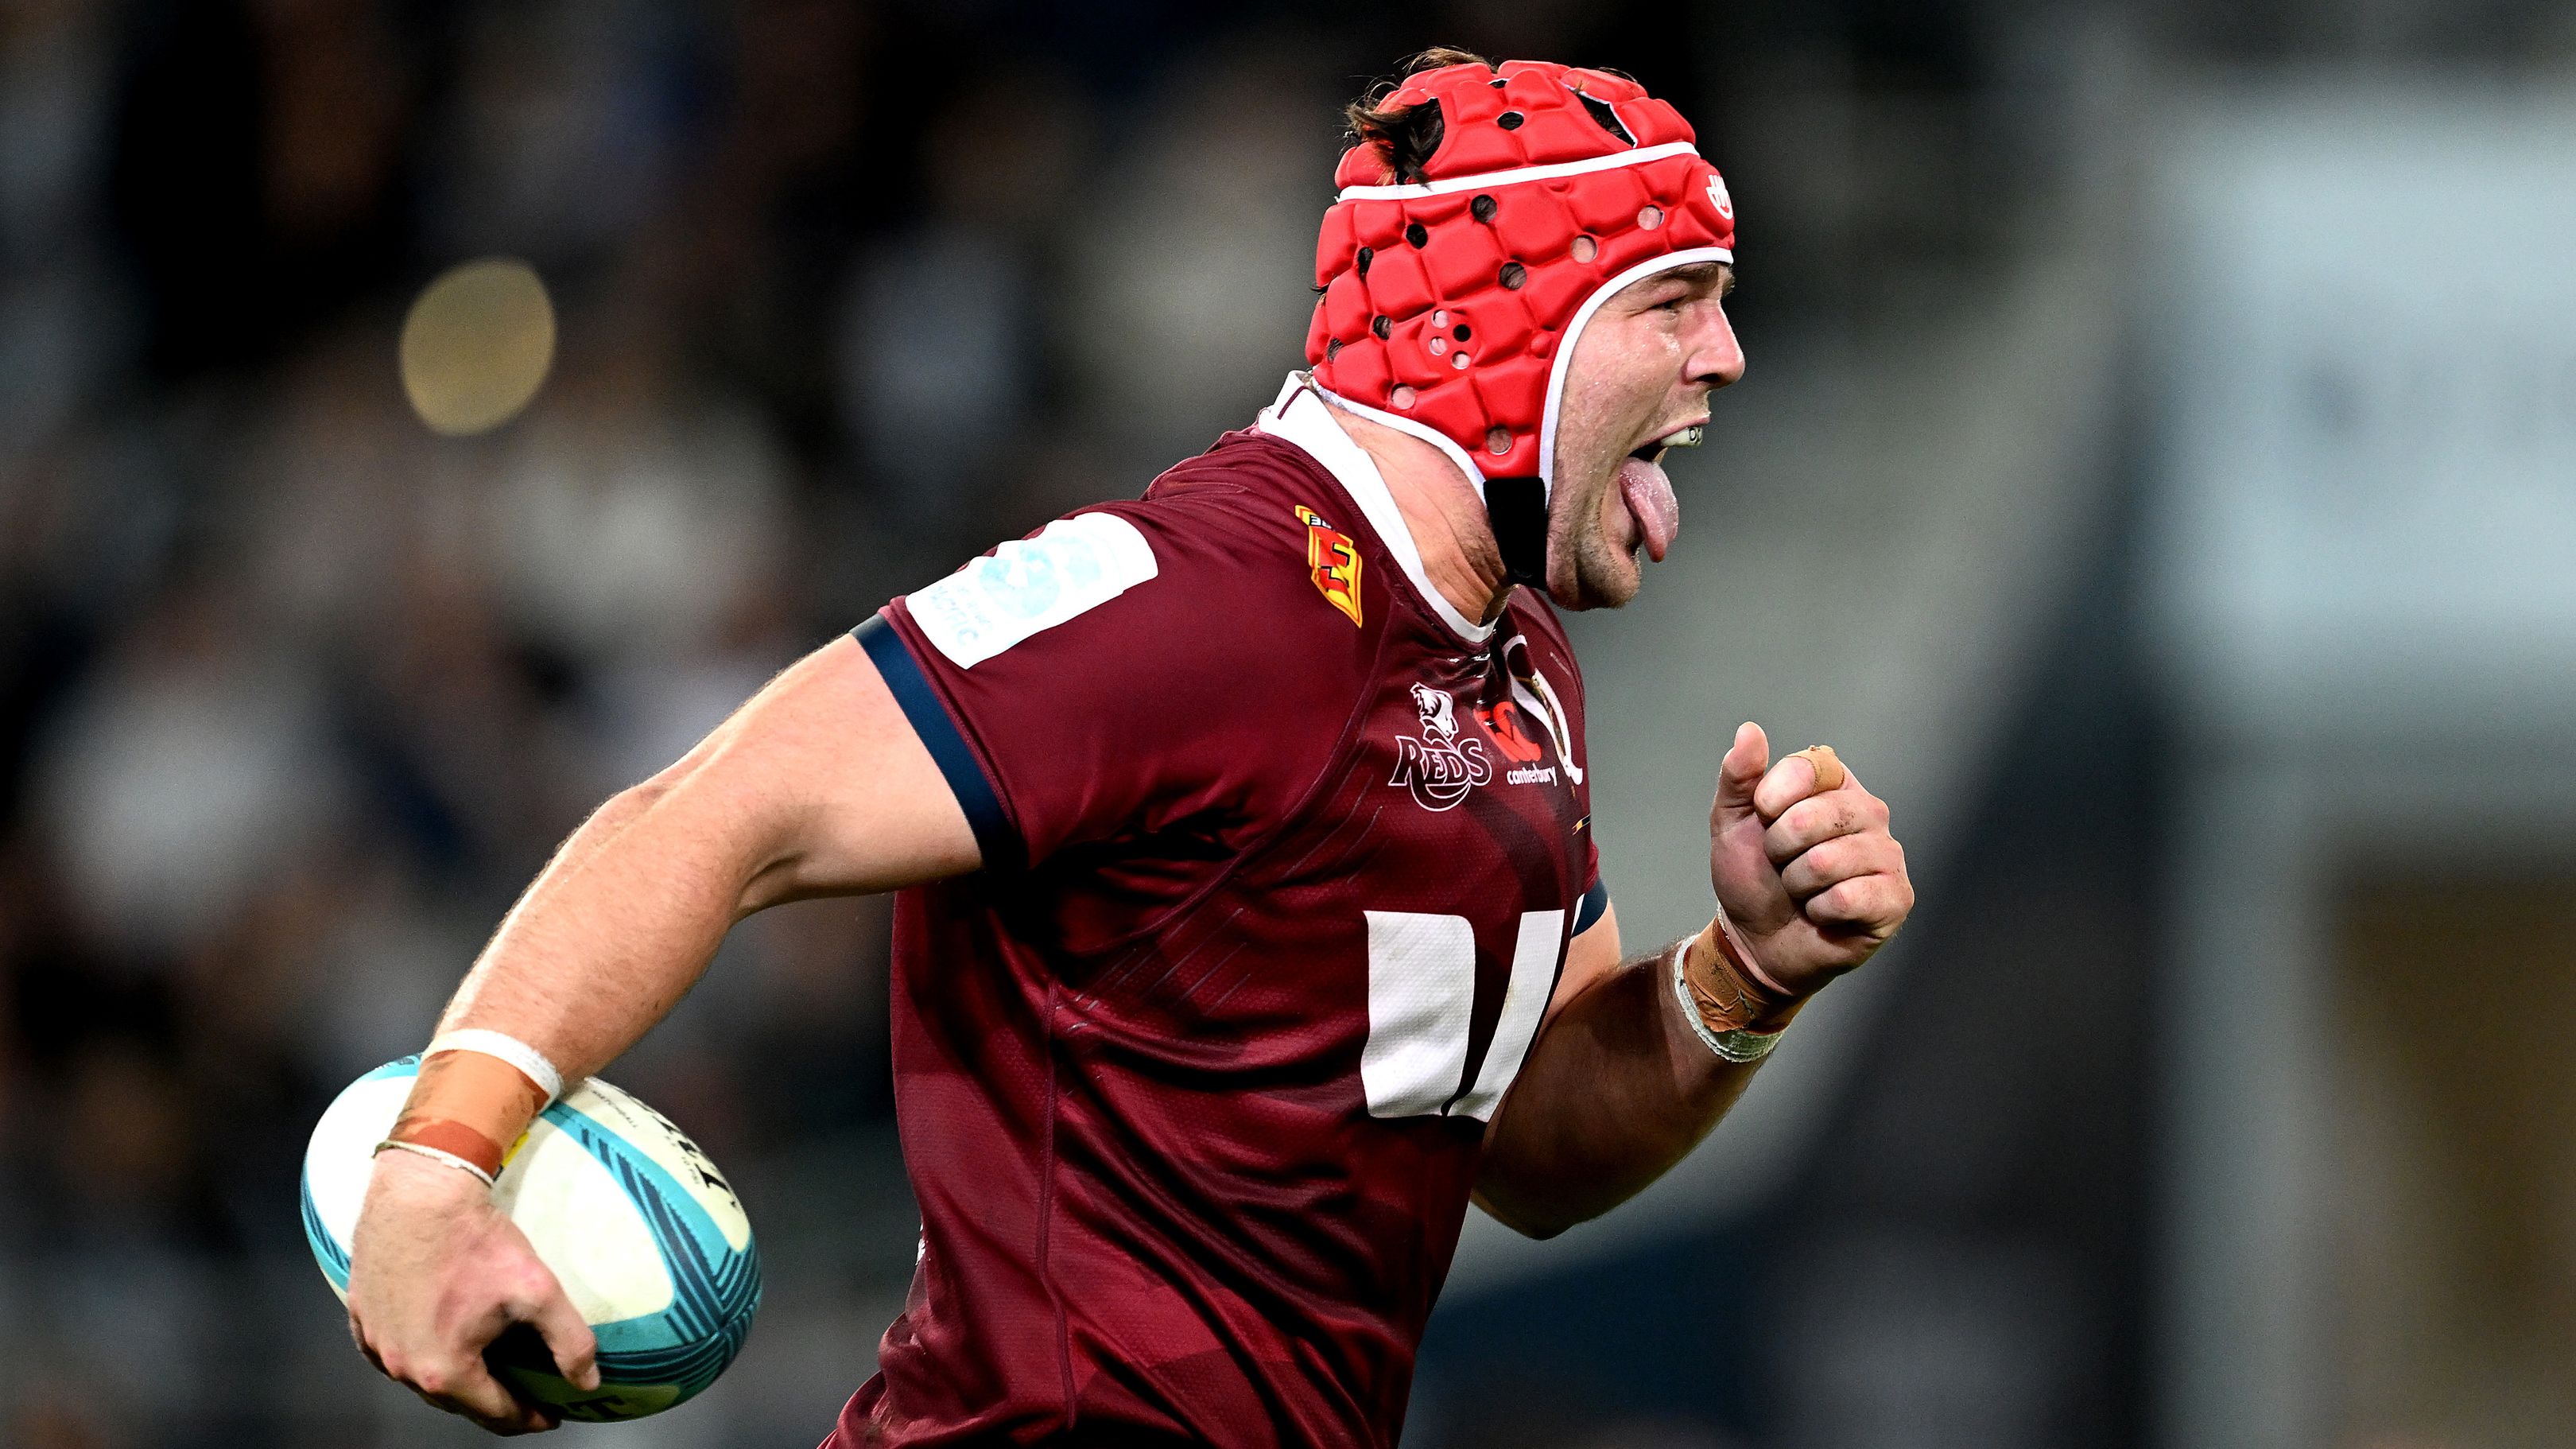 Queensland Reds bolter Harry Wilson sticks his tongue out as he sprints towards the Highlanders defence.